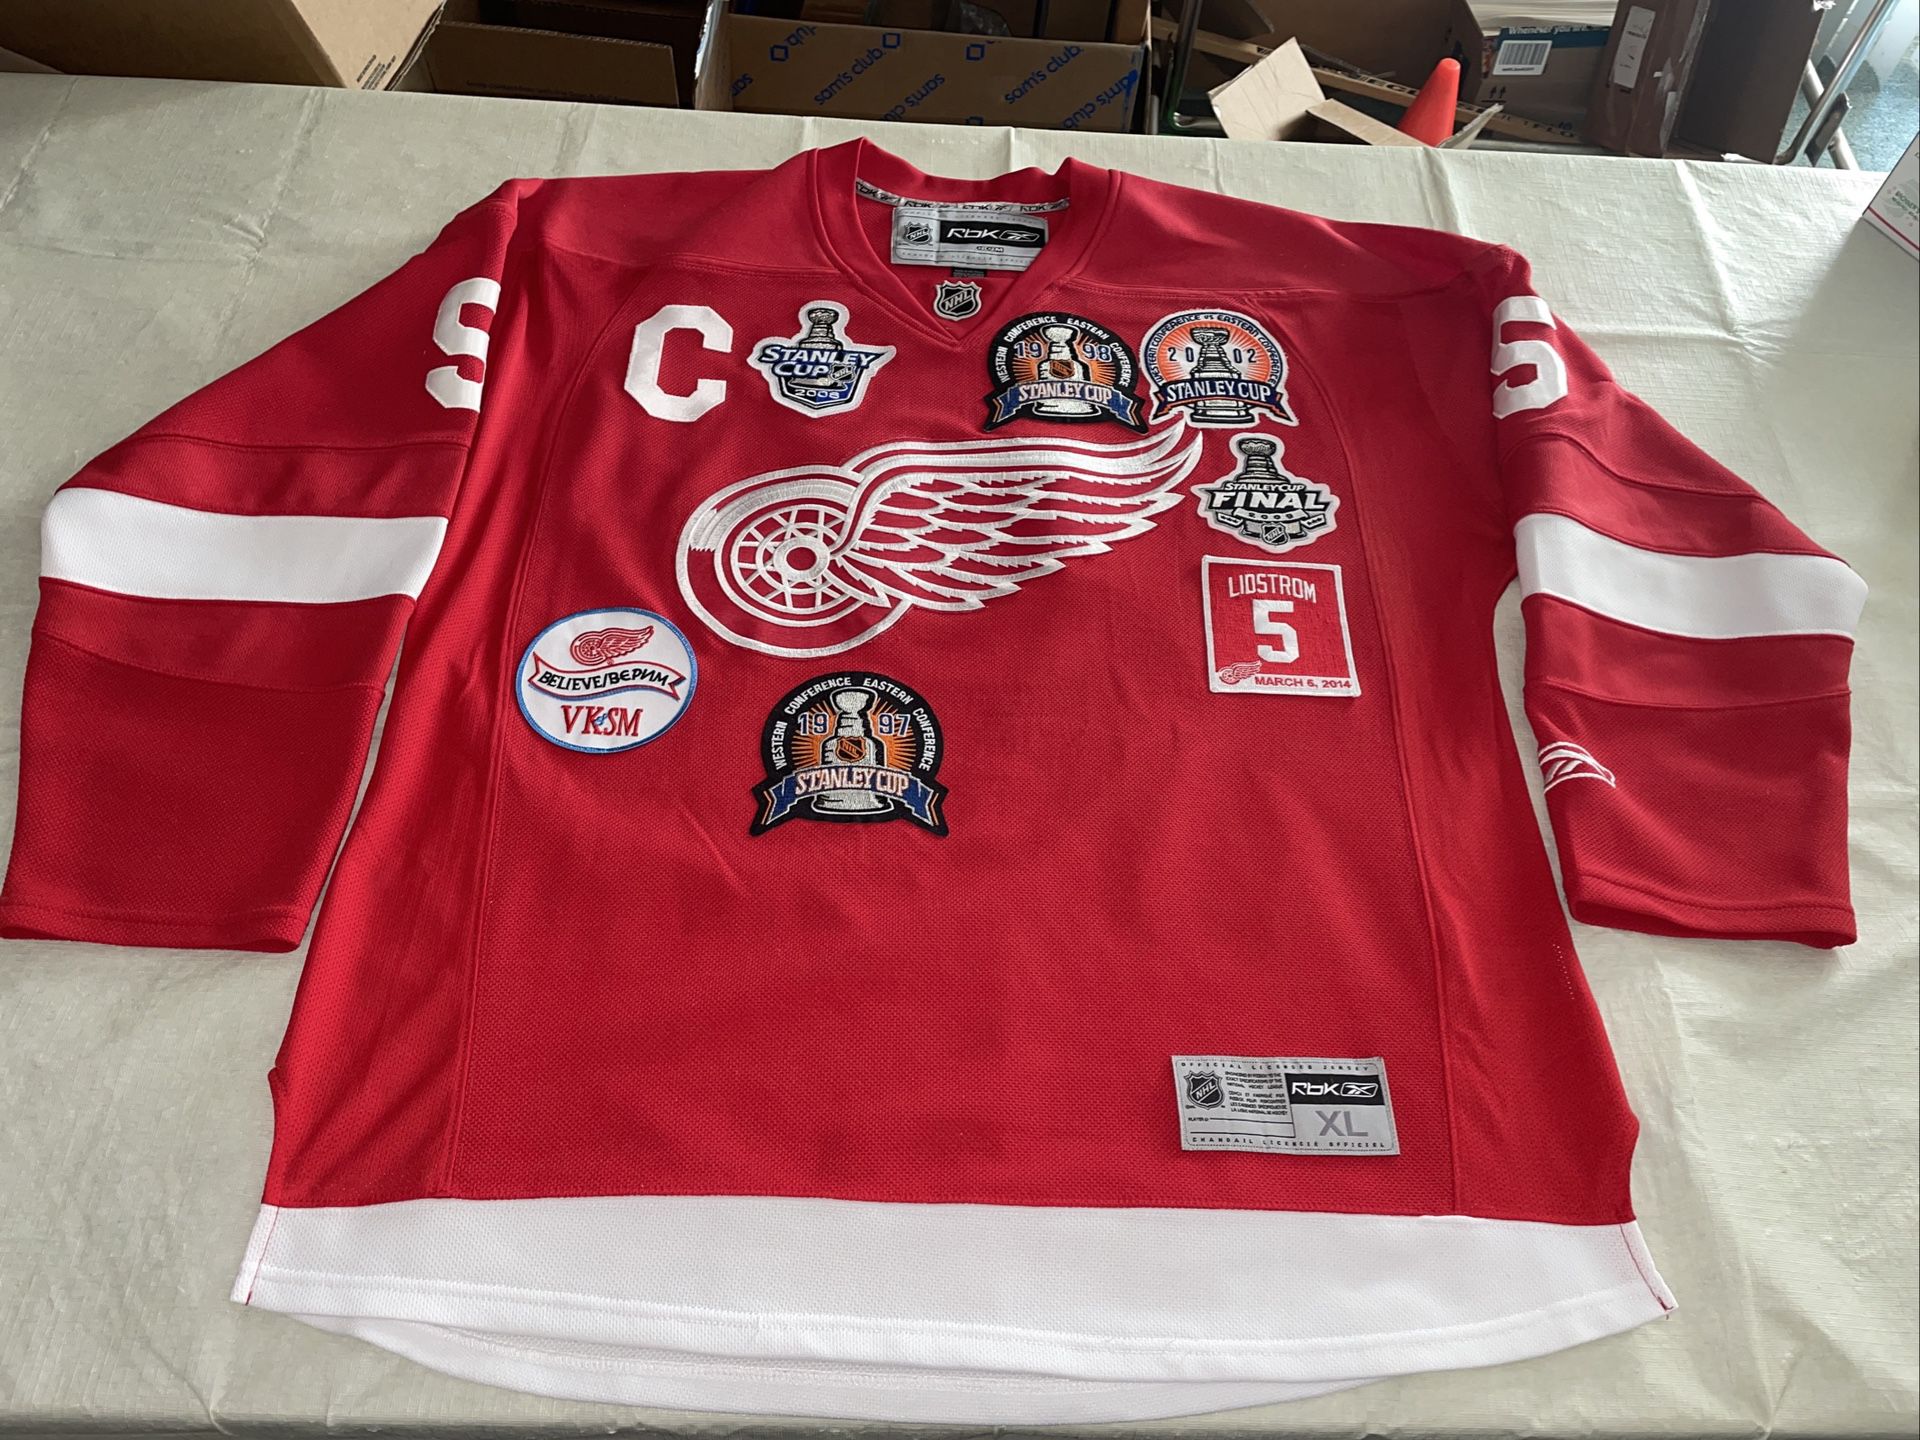 Red Wings official patch jersey